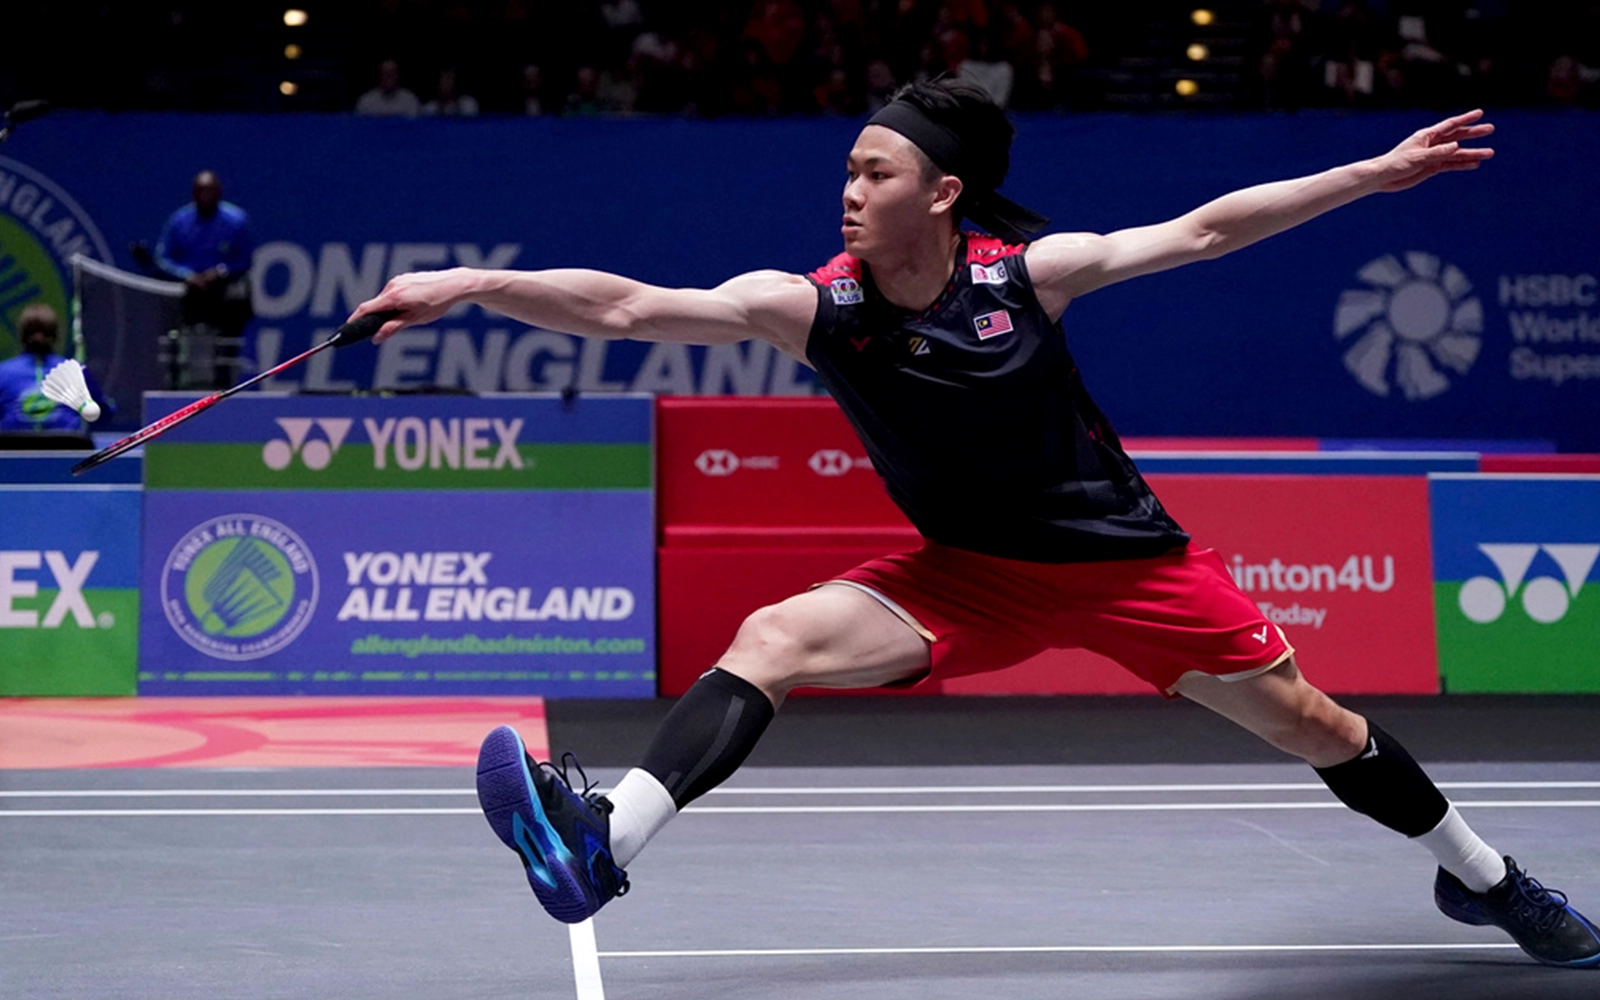 Zii Jia’s All England campaign comes to an end